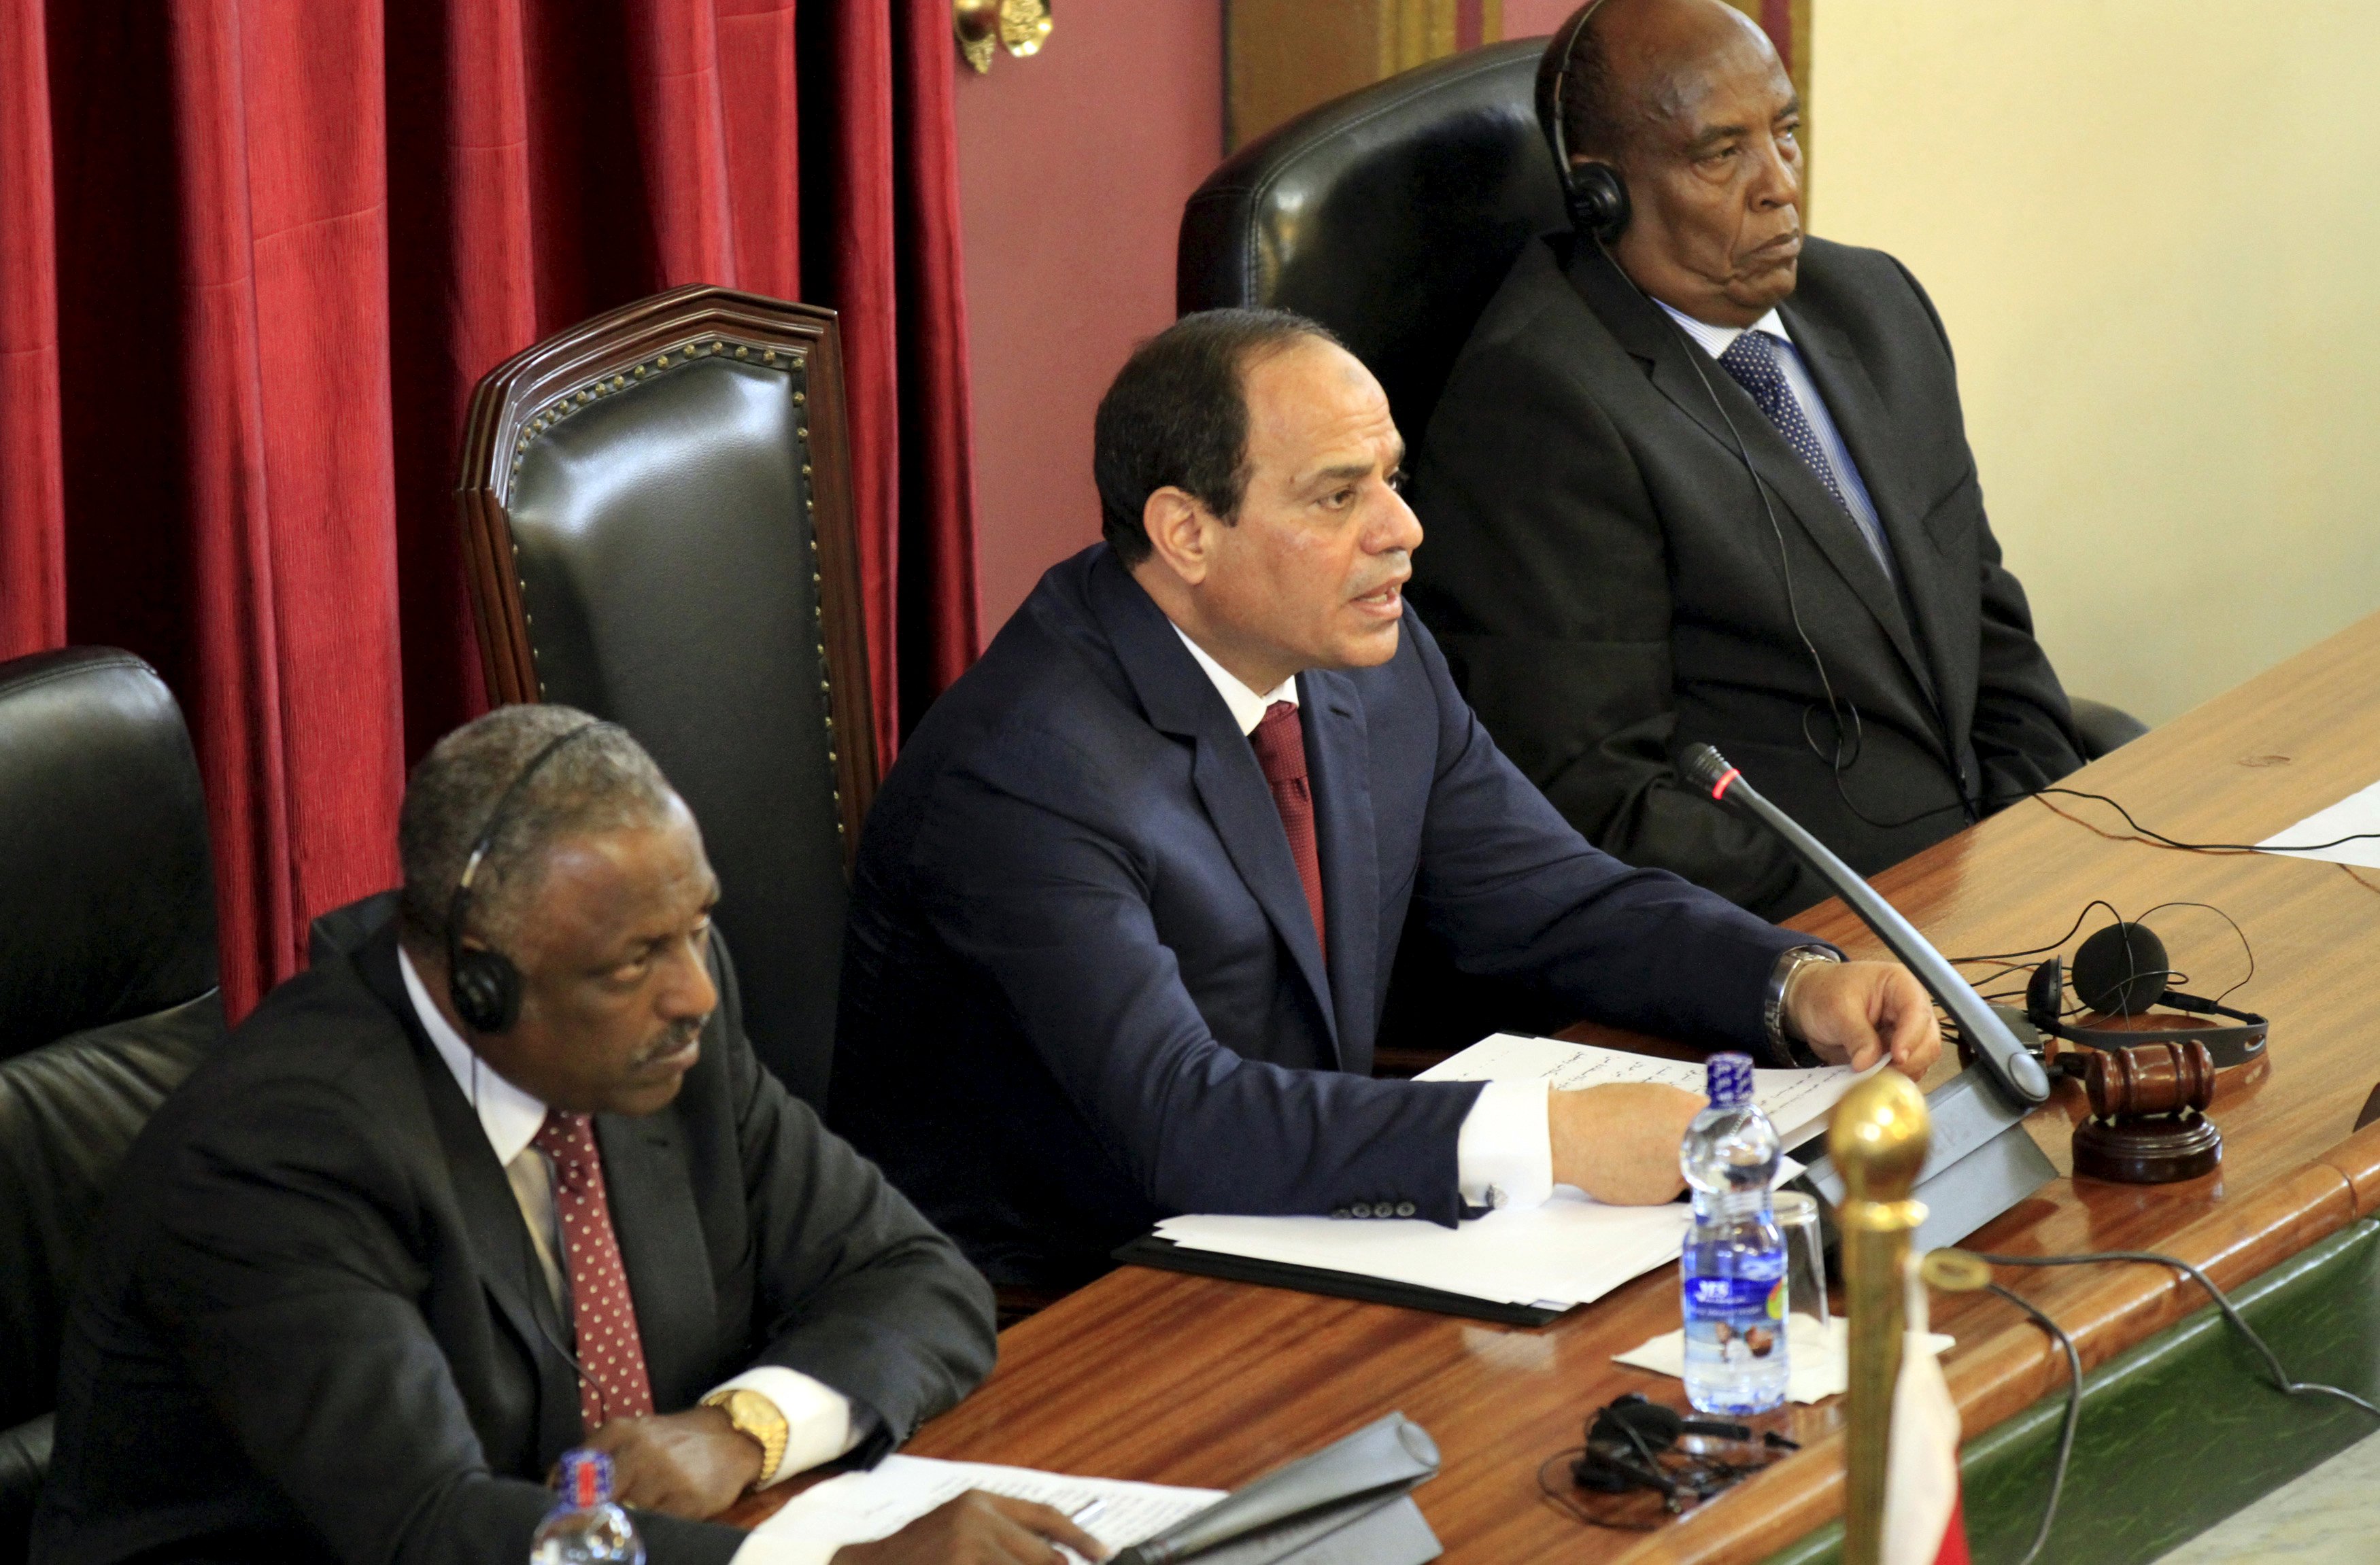 Egyptian President Abdel-Fattah el-Sissi (C) flanked by Speaker of the House of Peoples' Representatives Abadula Gemeda (L) and Deputy Speaker of House of Federation Mohammed Rashid (R), addresses the Ethiopian Parliament during his official visit to Ethiopia's capital Addis Ababa, March 25, 2015.